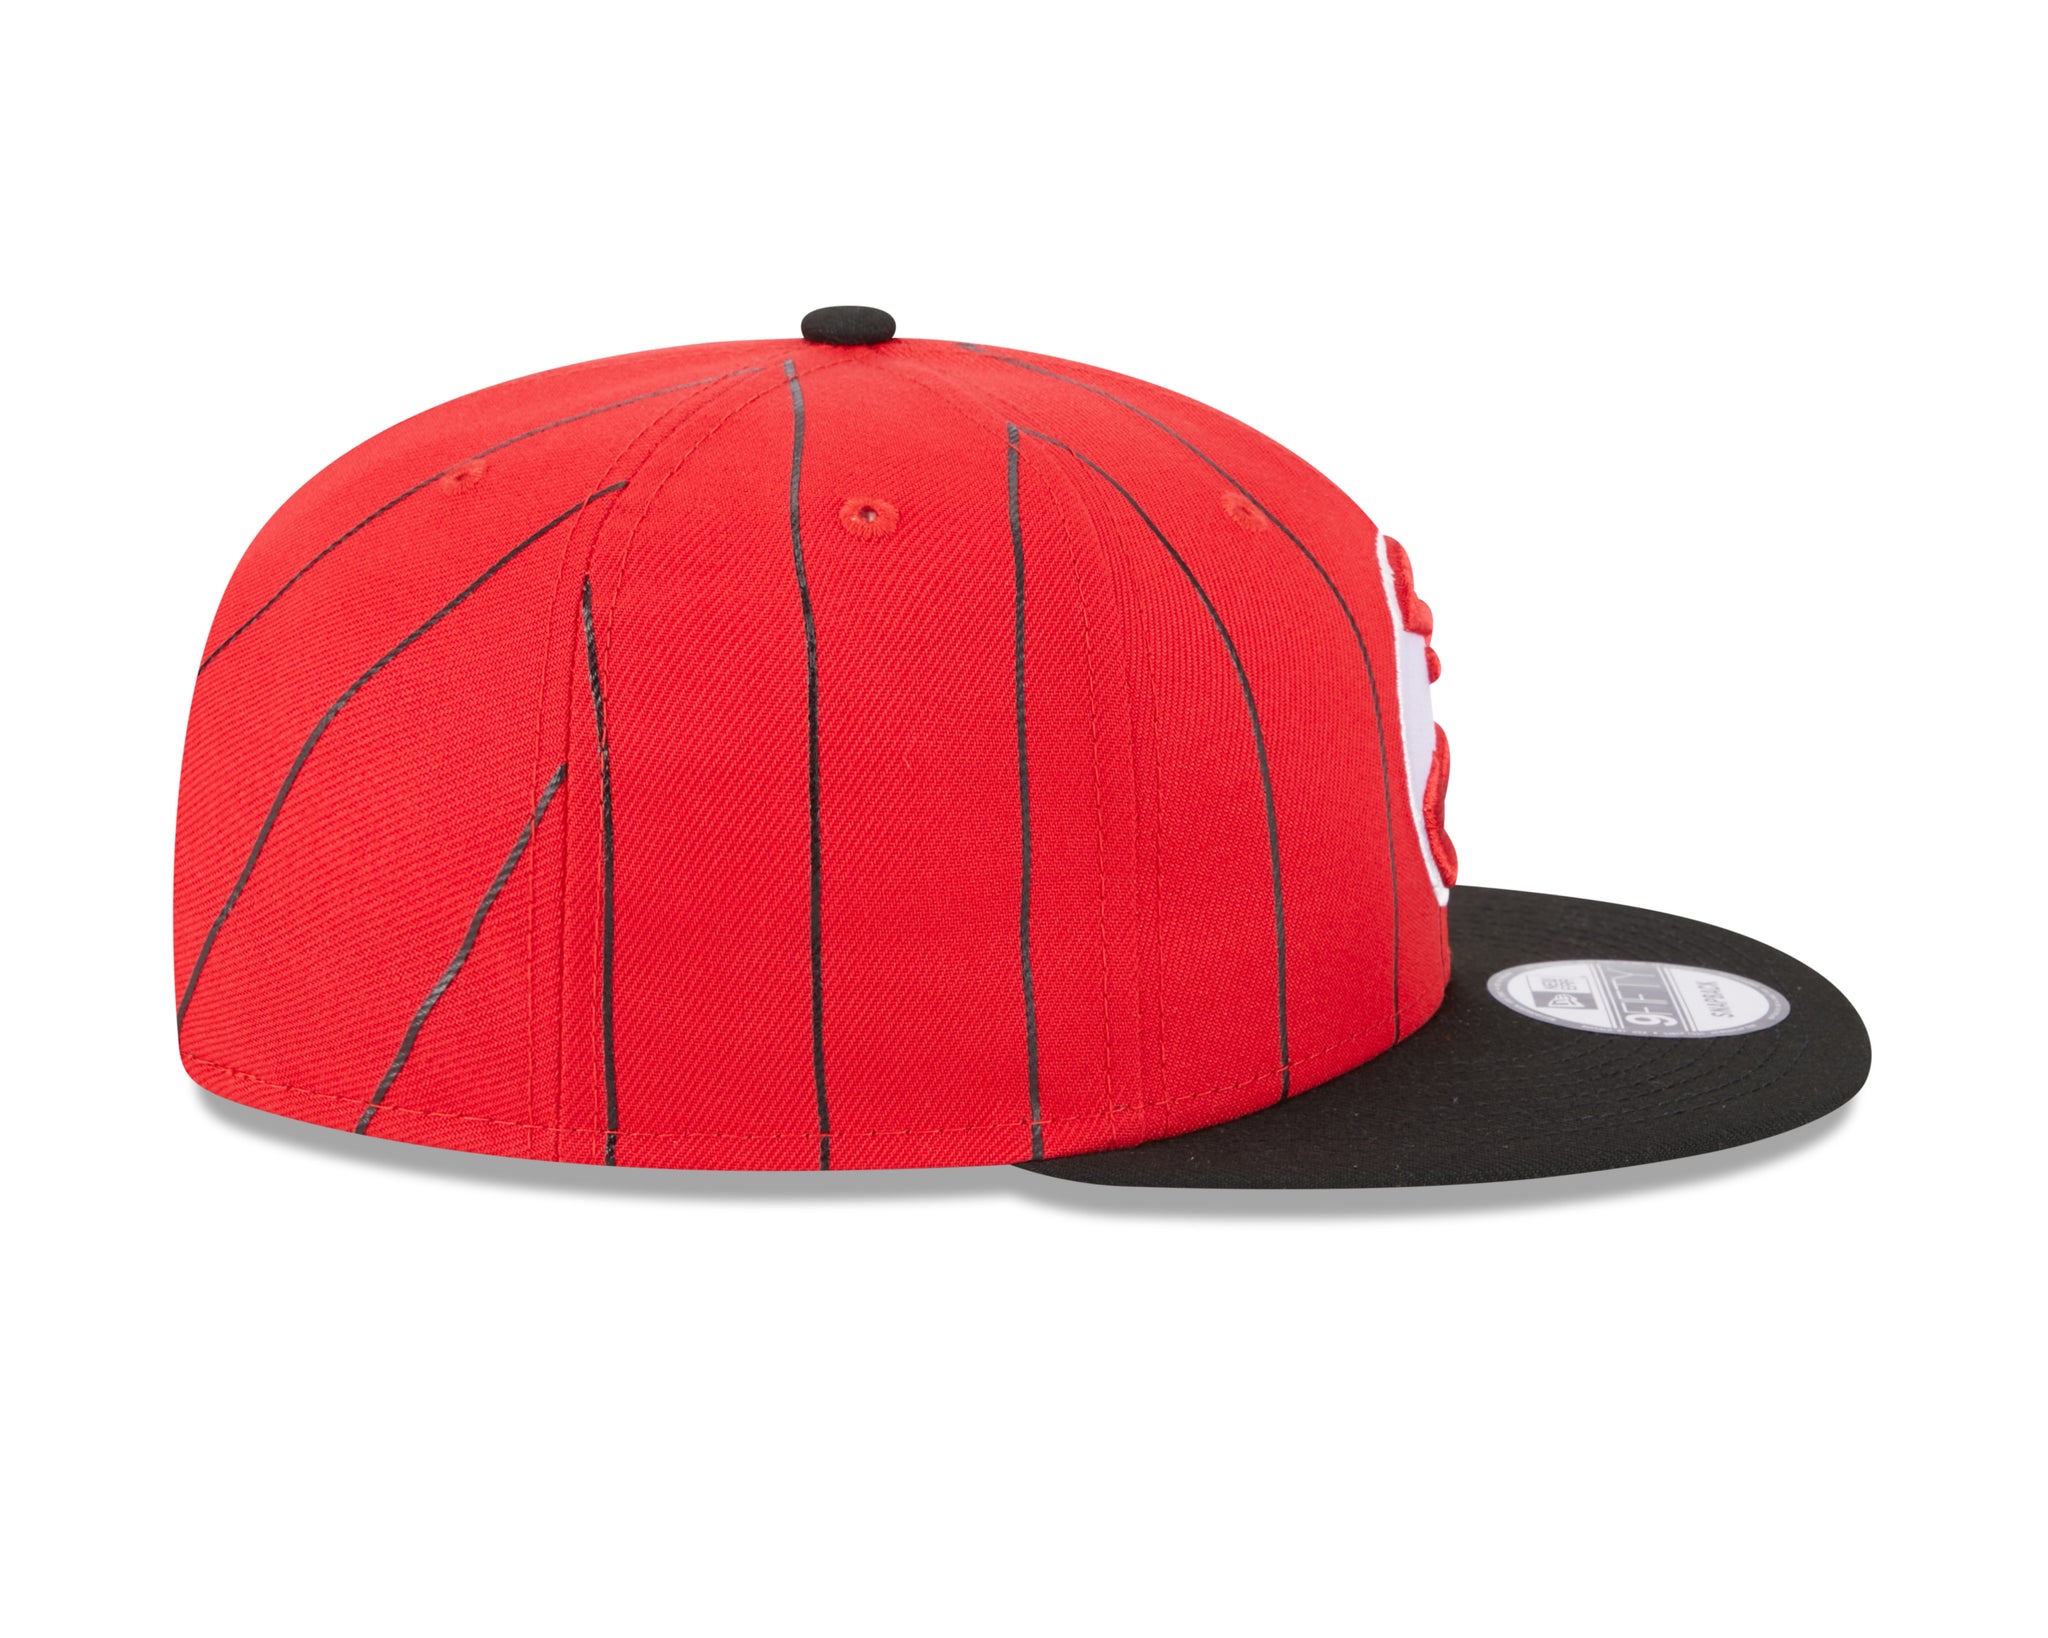 V's Pinstripe Fitted Hat